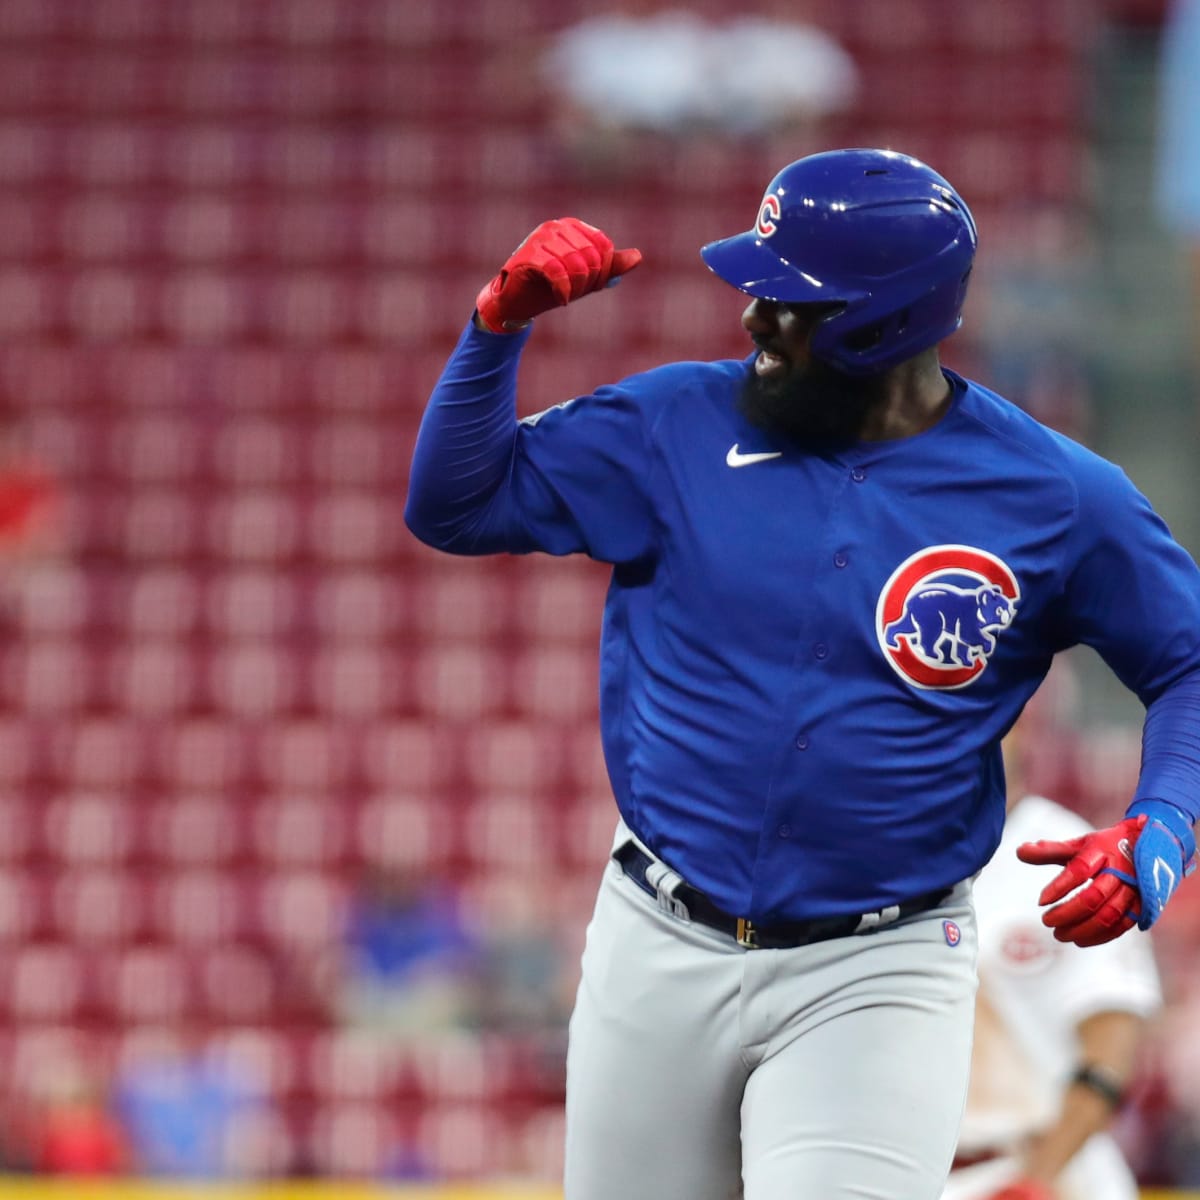 State of the Cubs: Where roster stands at shortstop in 2022 and